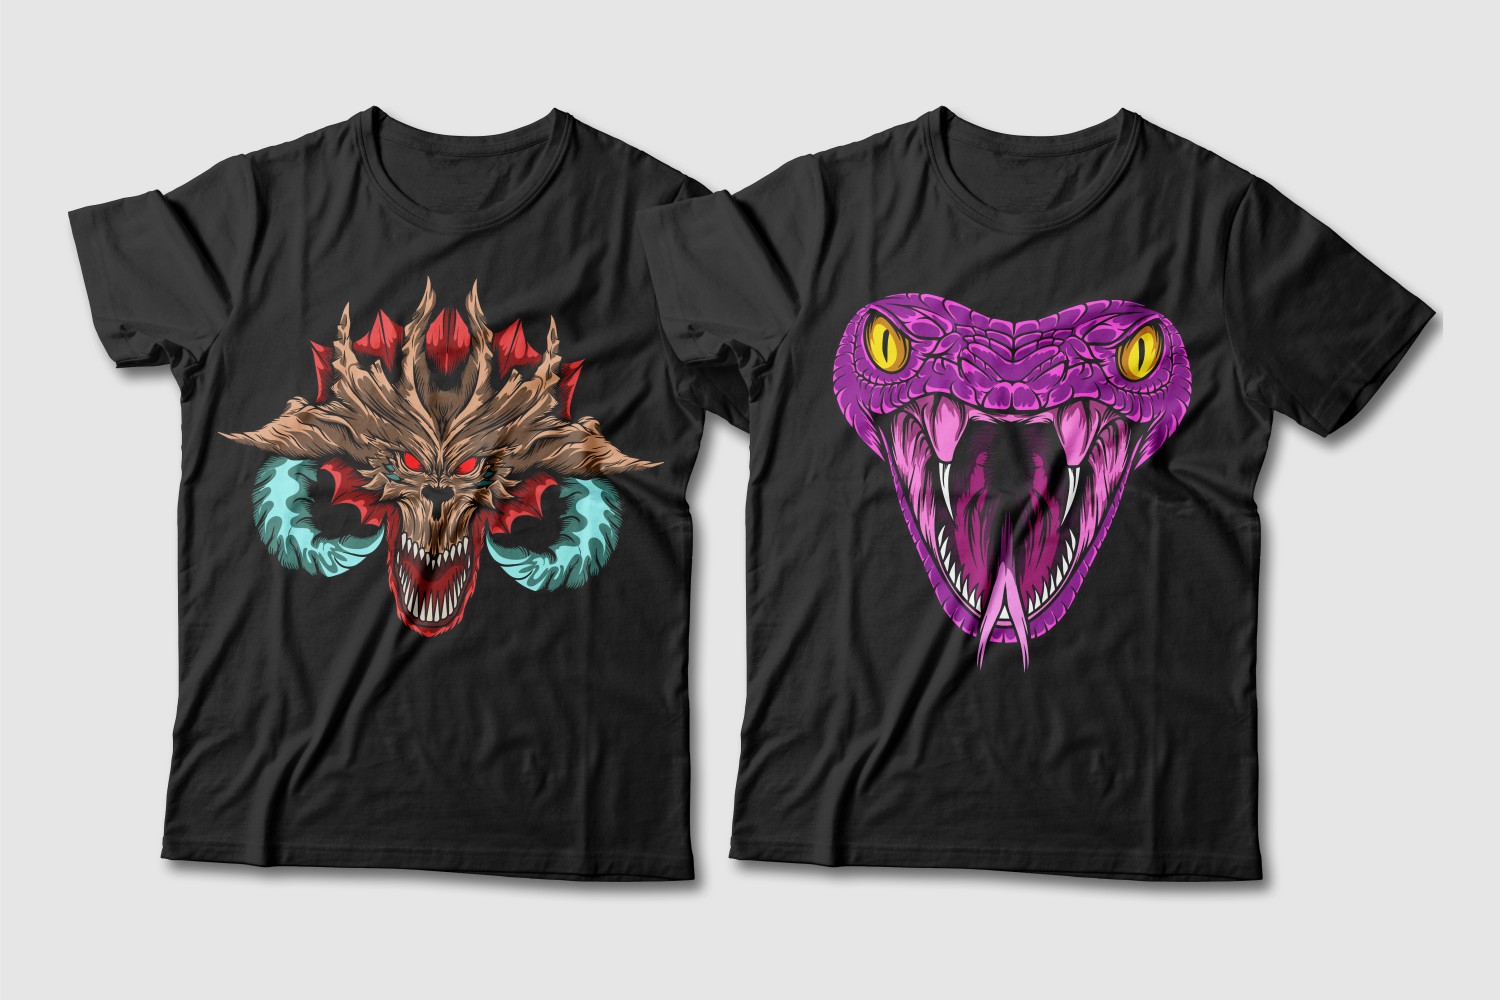 Black Crewneck T-shirts featuring a brown dragon with a turquoise tuft and eyes and a crimson cobra with yellow eyes.